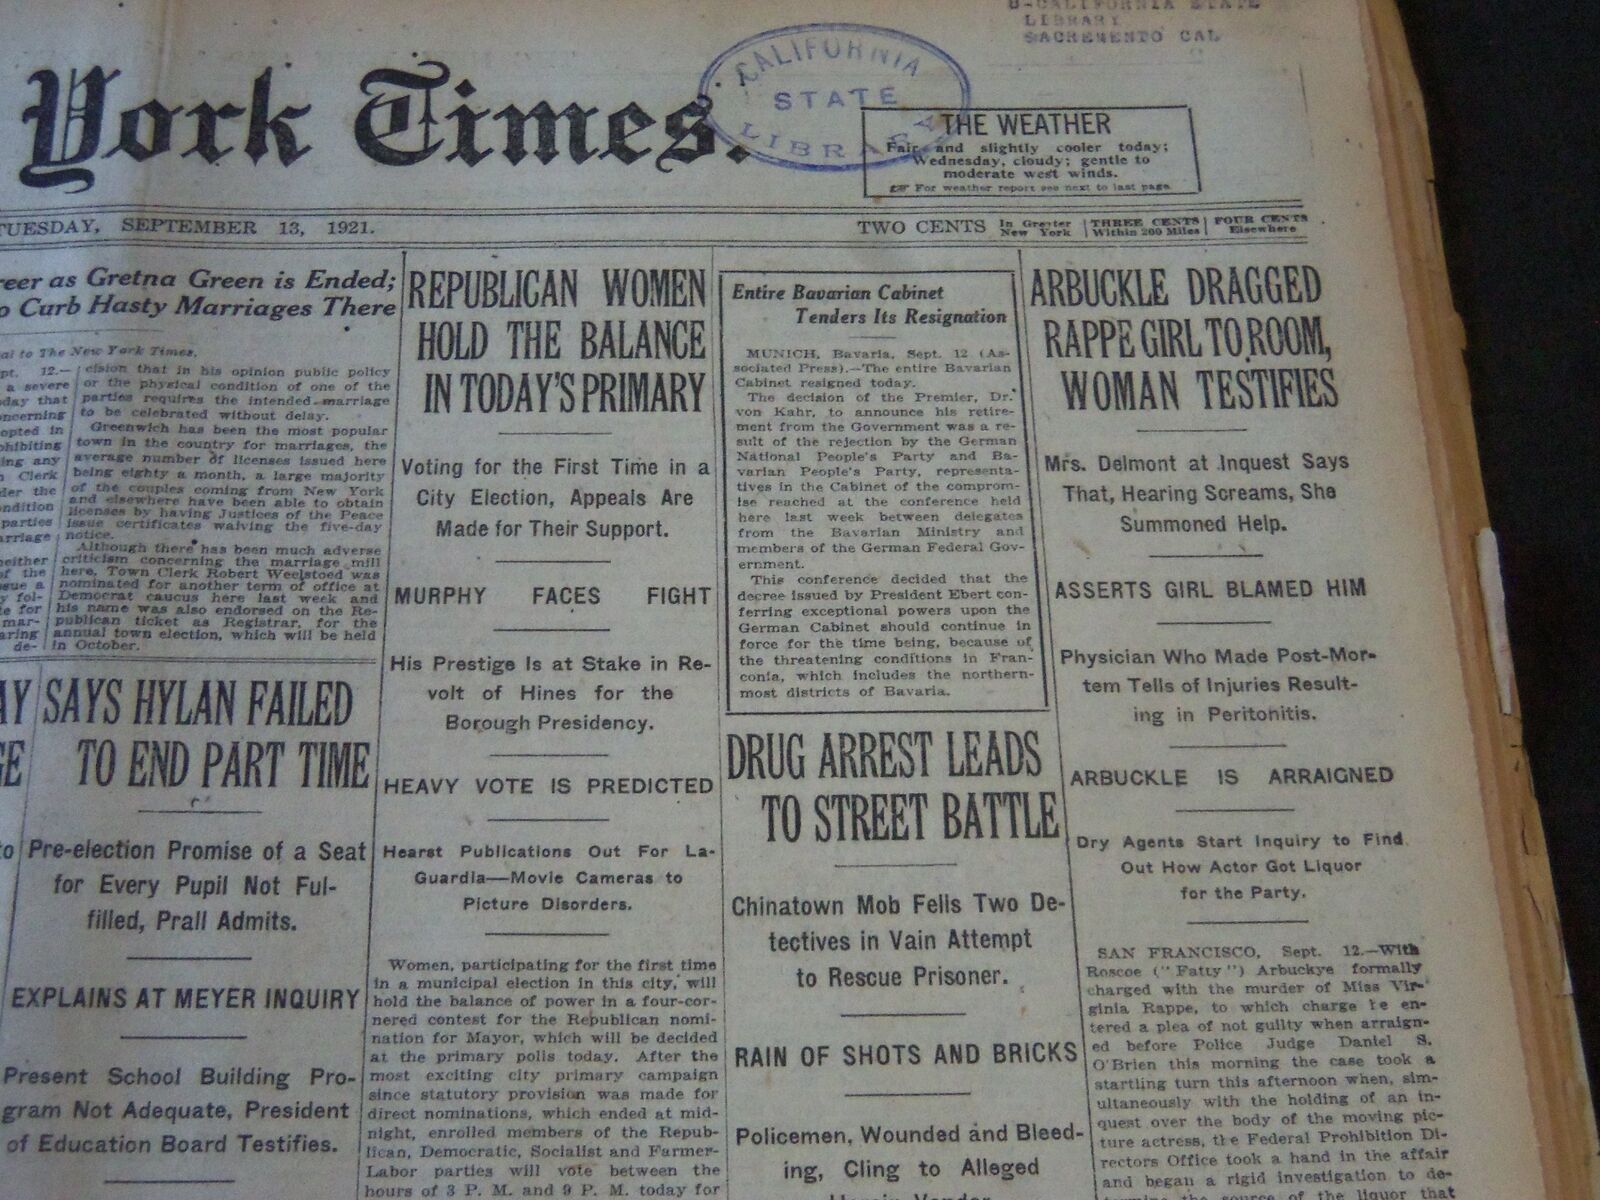 1921 SEPT 13 NEW YORK TIMES - ARBUCKLE DRAGGED RAPPE TO ROOM WOMAN - NT 6468